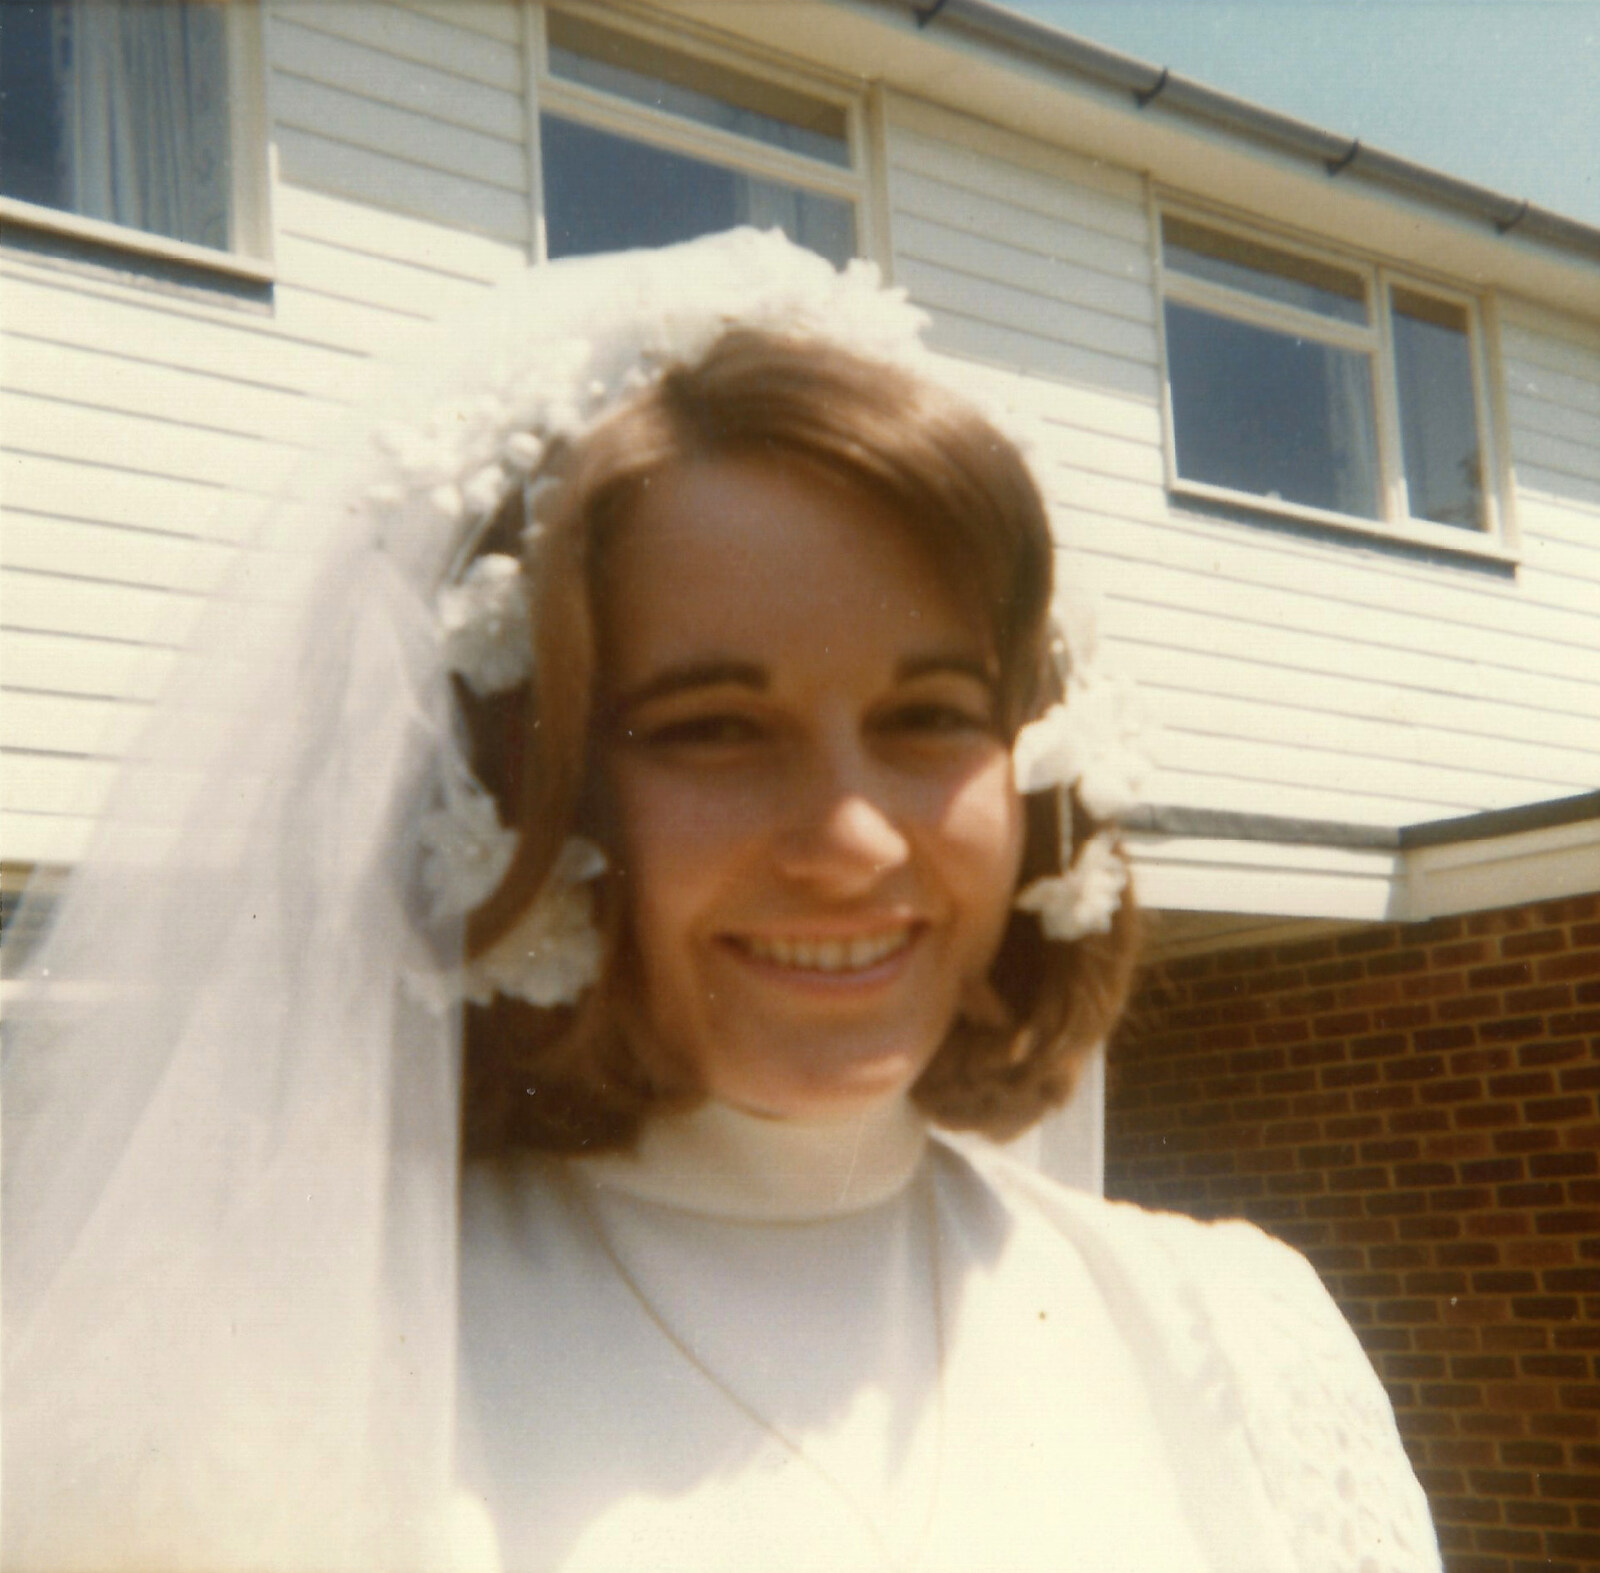 Caroline, outside the house in Burton from Family History: The 1970s, Timperley and Sandbach, Cheshire - 24th January 2020